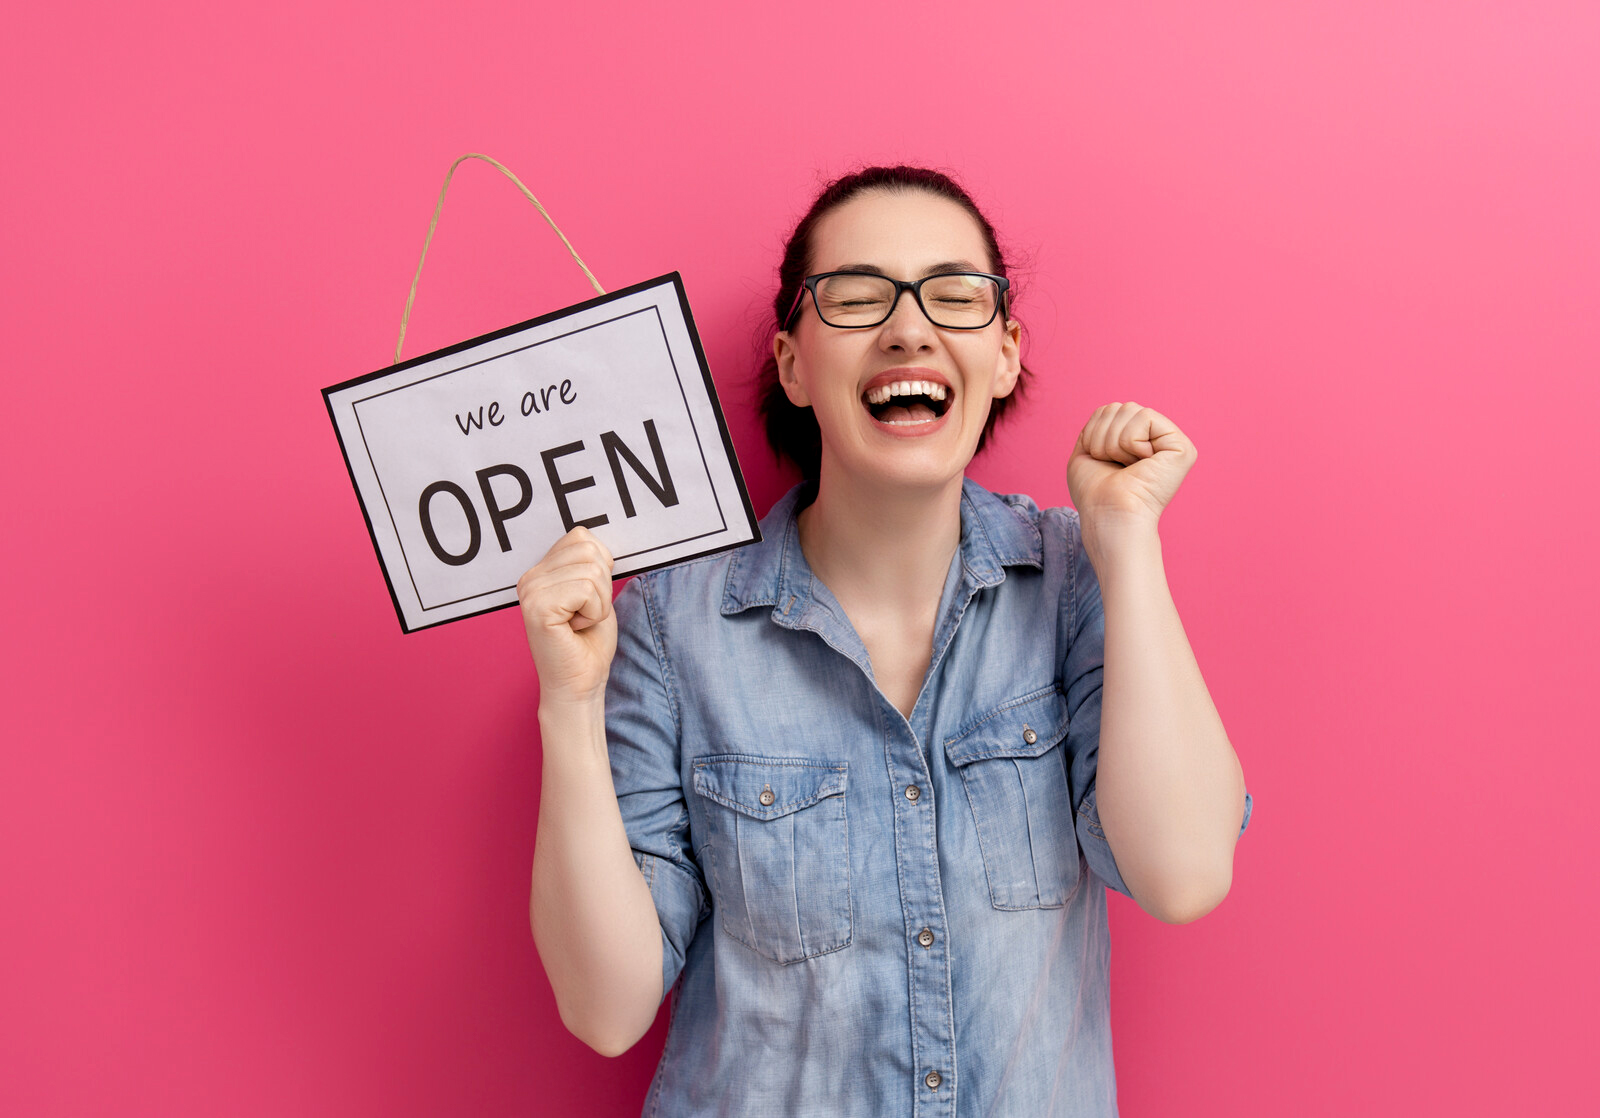 A happy woman holding an "open" sign with a pink background.